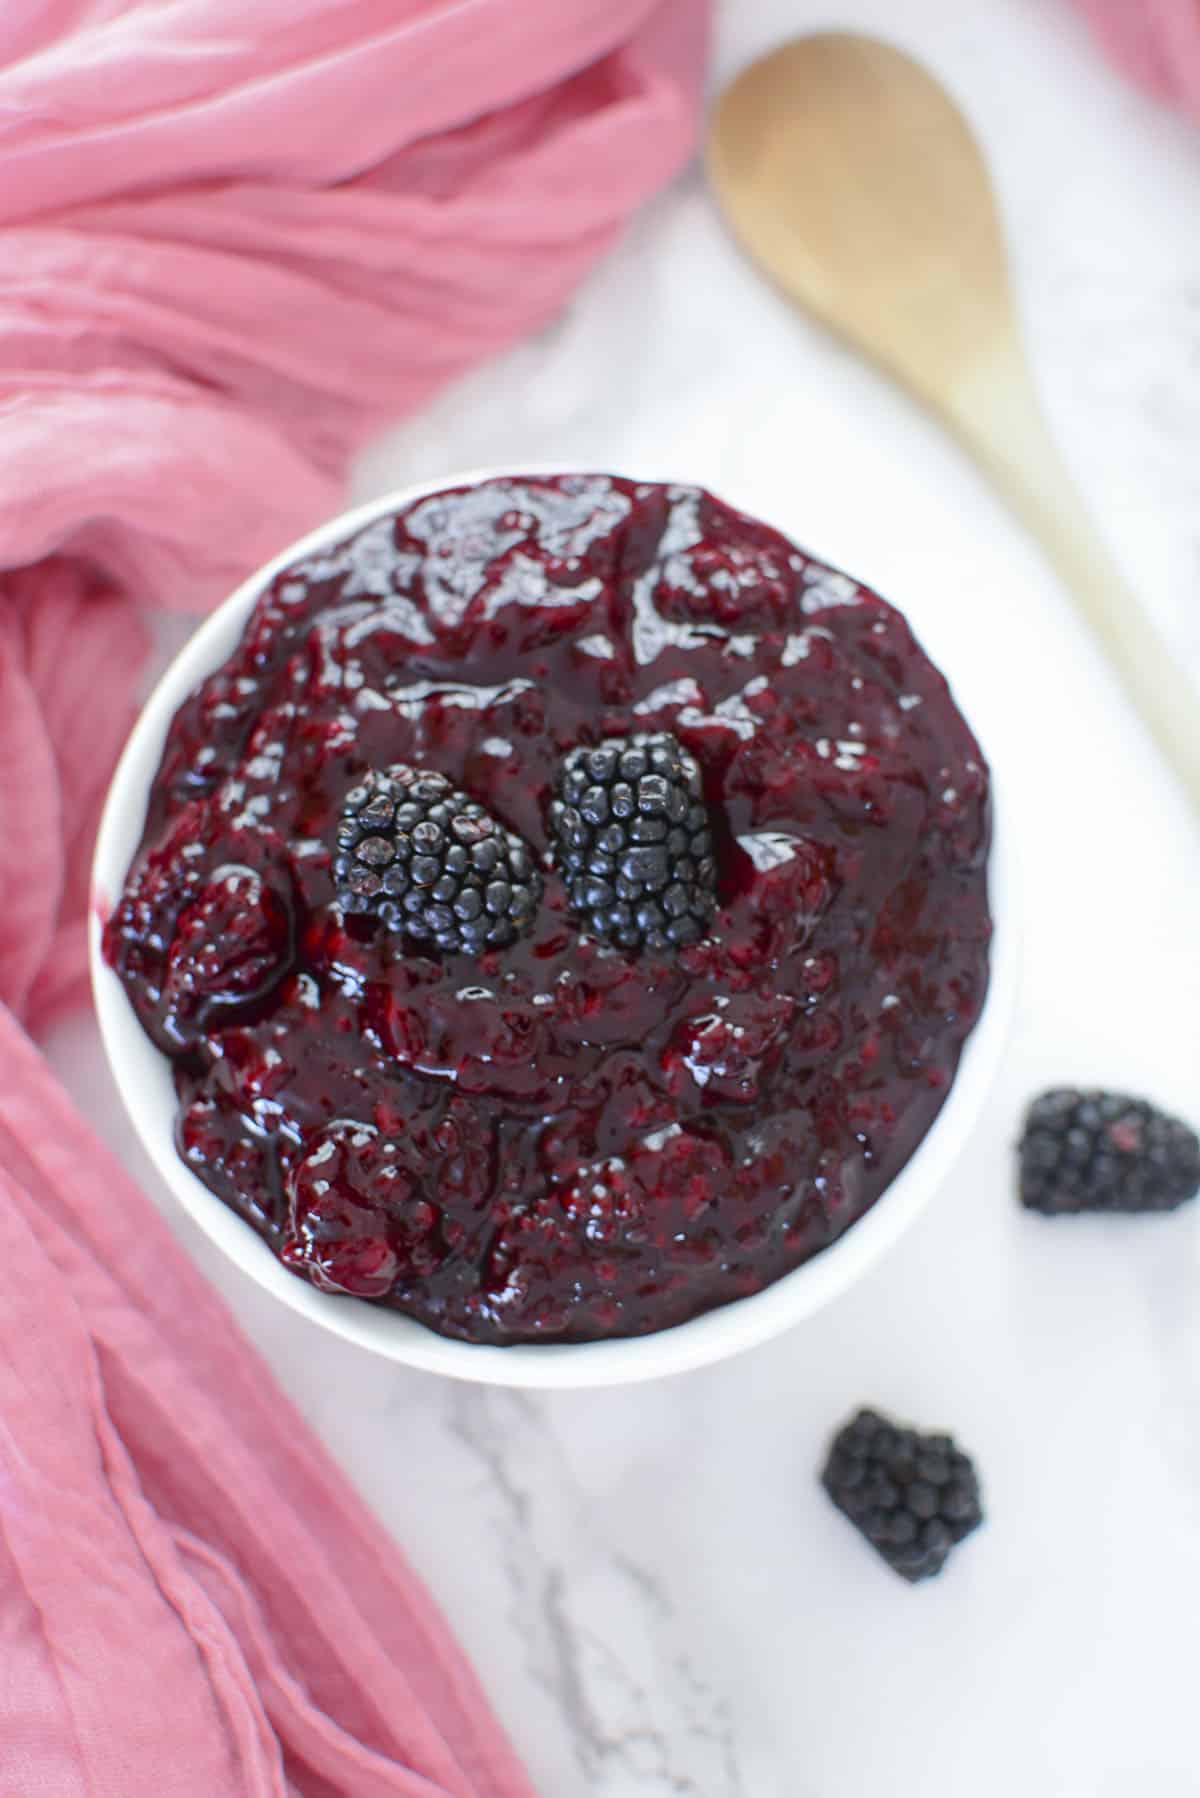 Blackberry pie filling in a white bowl with a wooden spoon on the upper right.